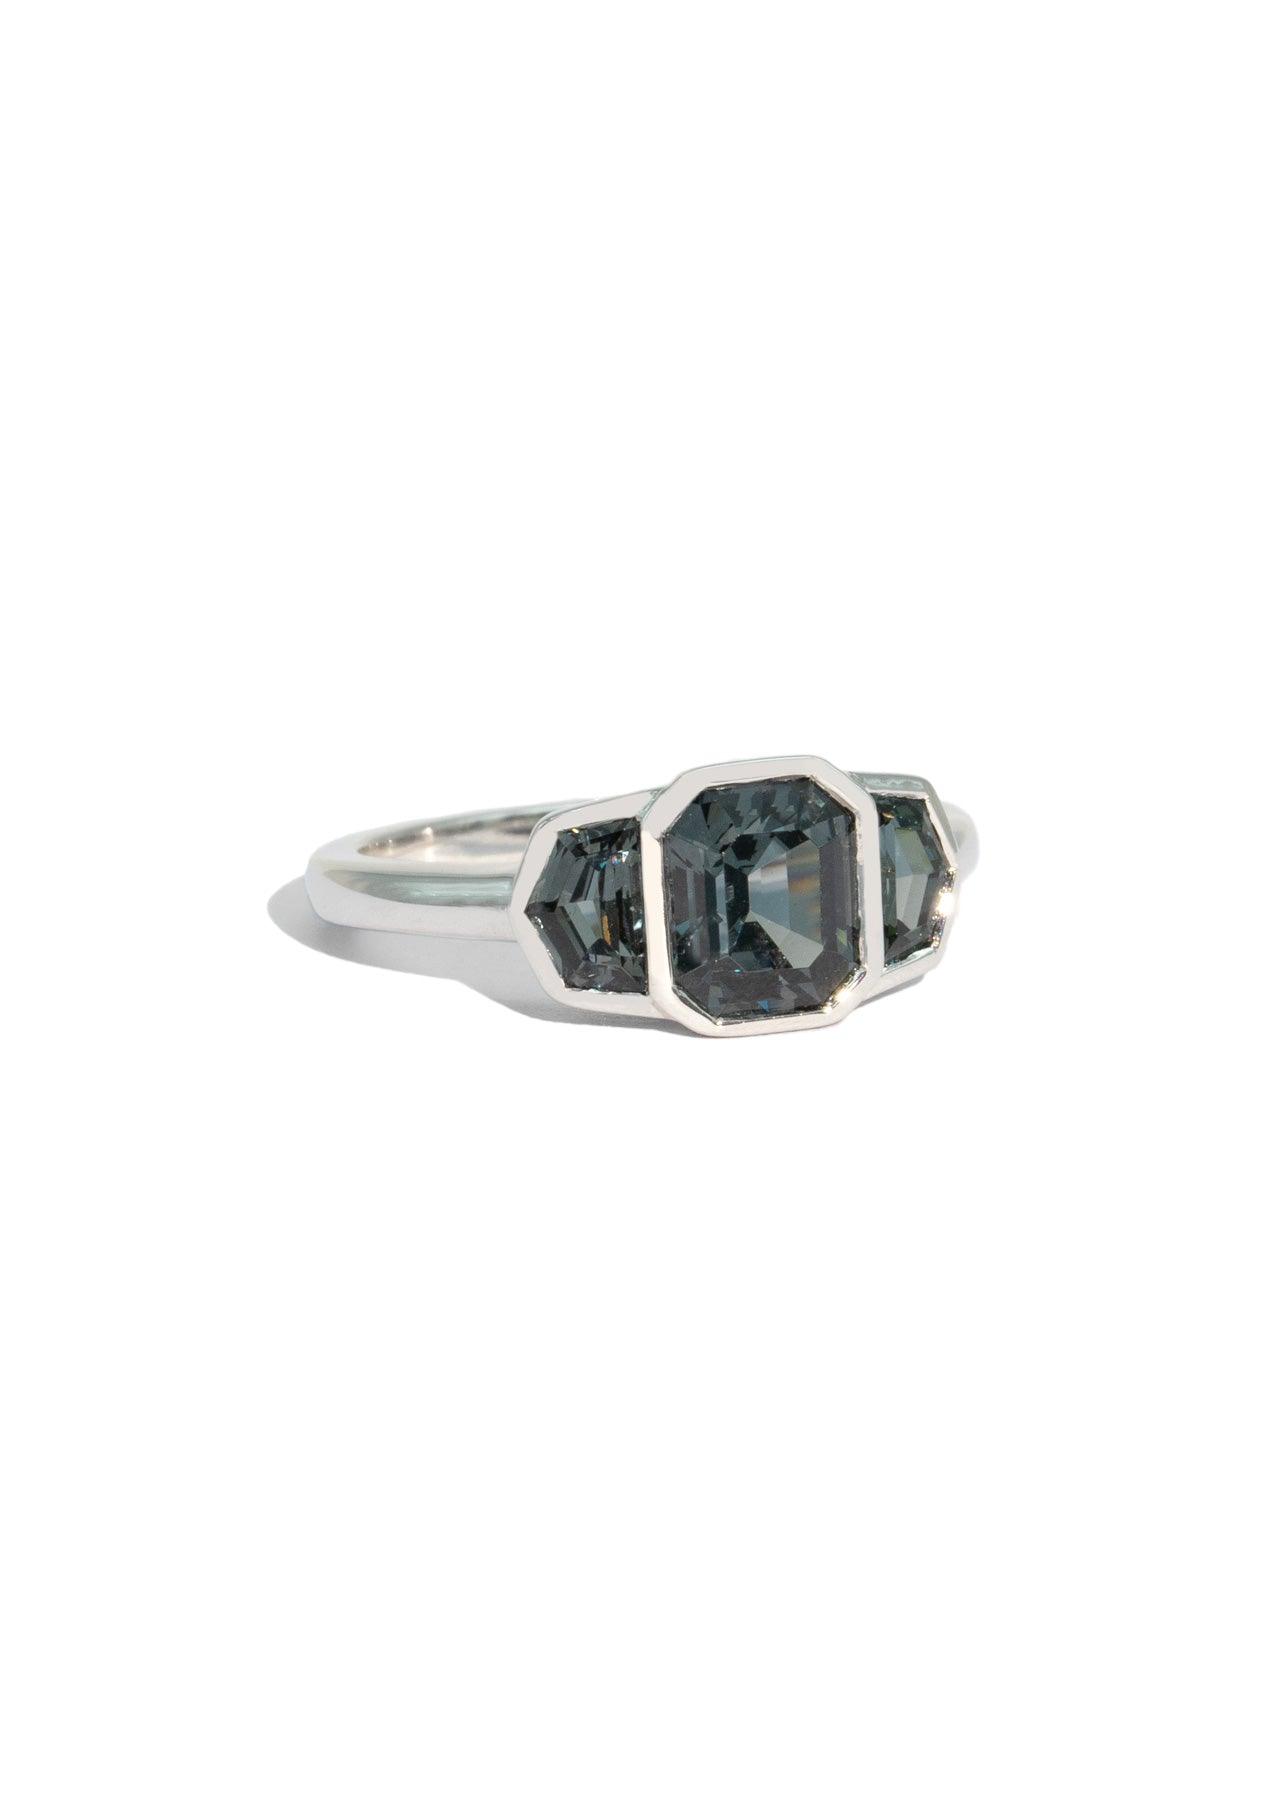 The Rosa 0.8ct Blue Spinel Ring - Molten Store